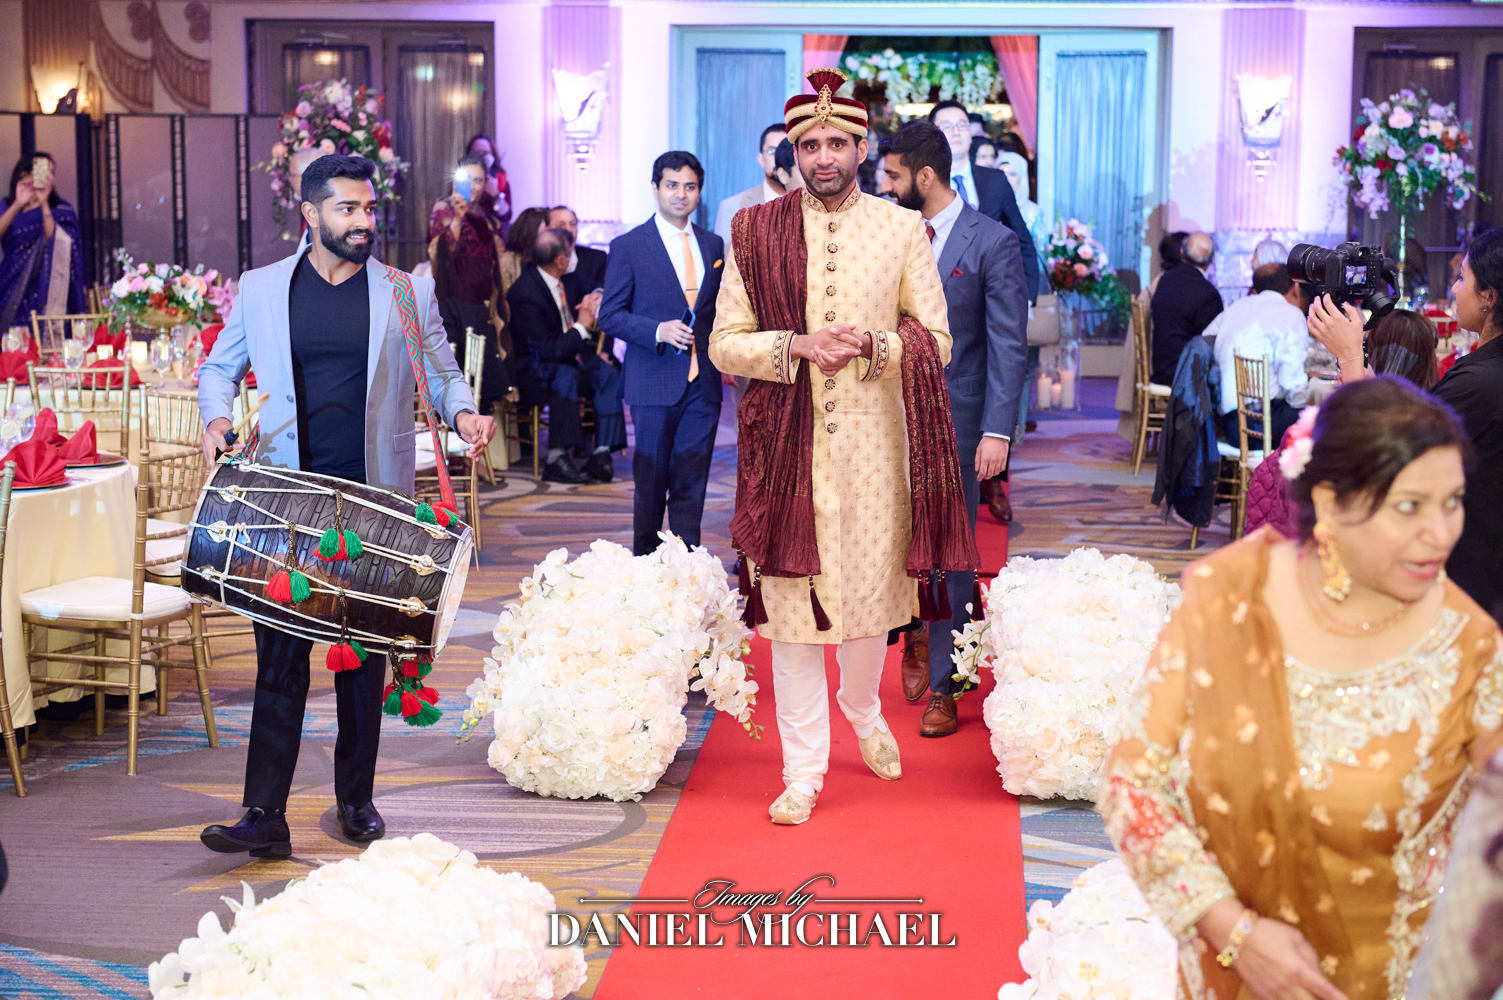 South Asian Muslim groom in traditional attire leading the processional at the Hilton Hall of Mirrors in Cincinnati during a wedding ceremony